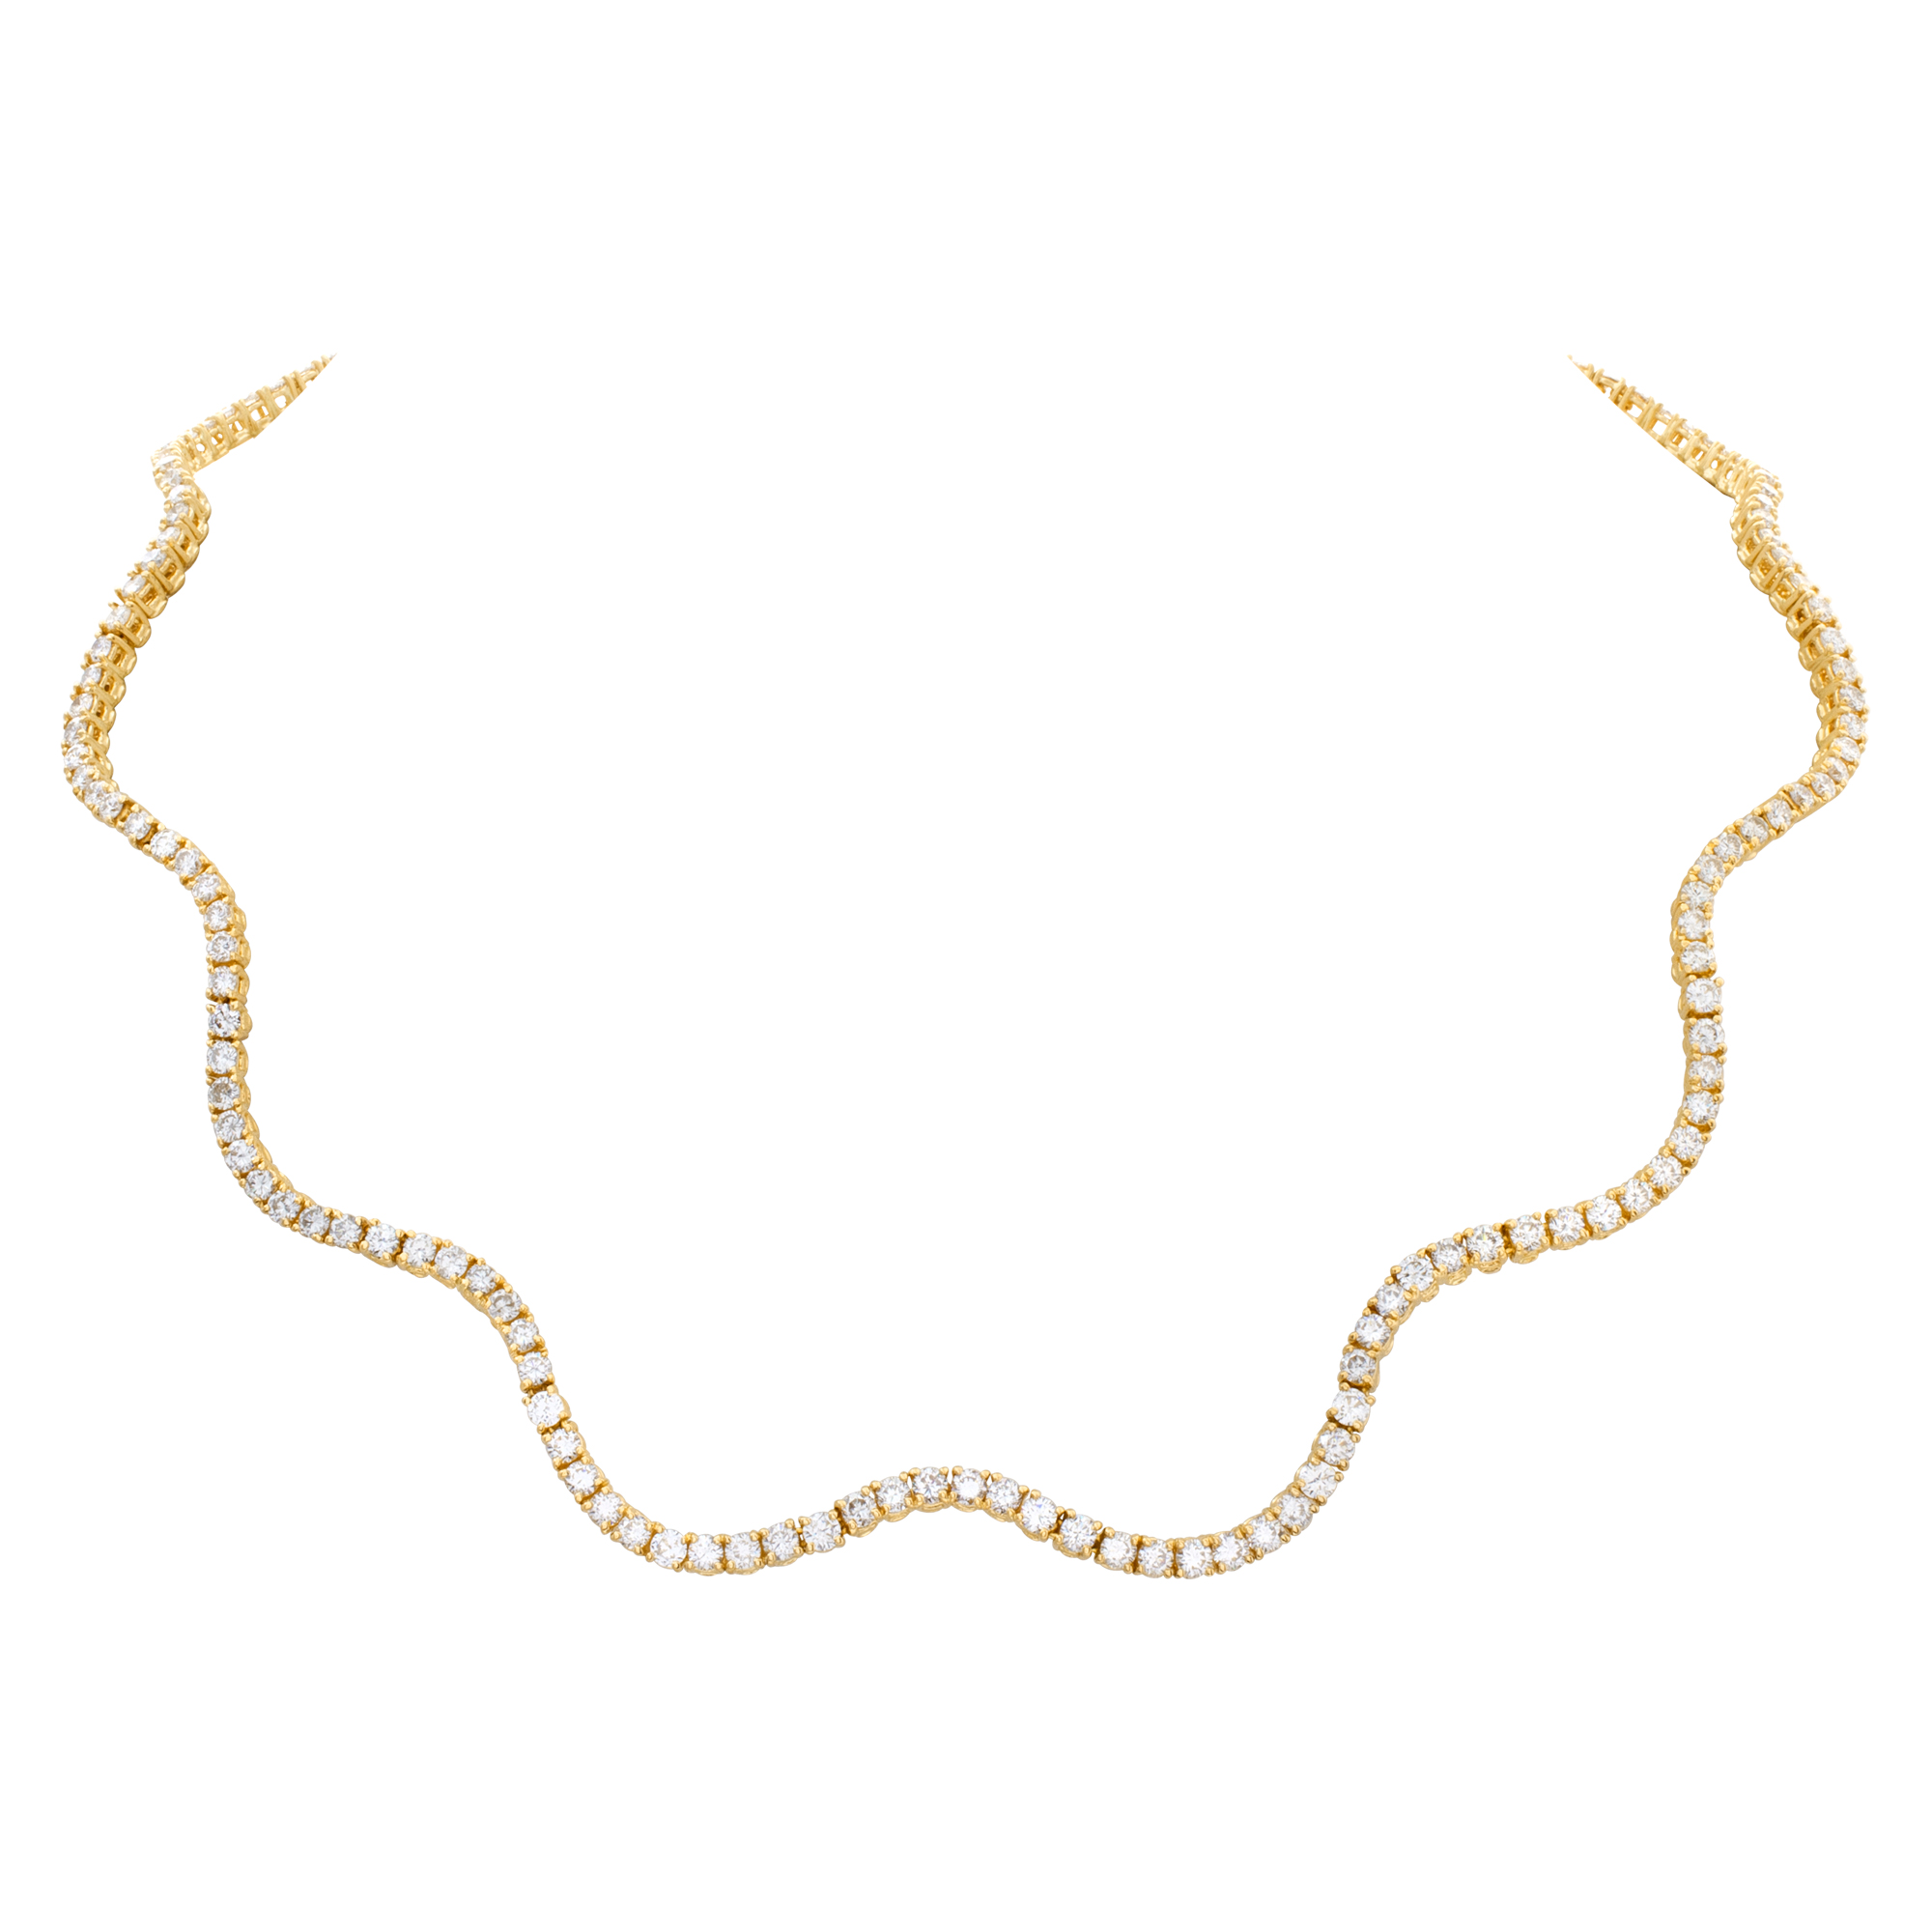 Sparkling diamond necklace with over 8 carats full cut round brlliant diamonds set in 18K yellow gold image 1